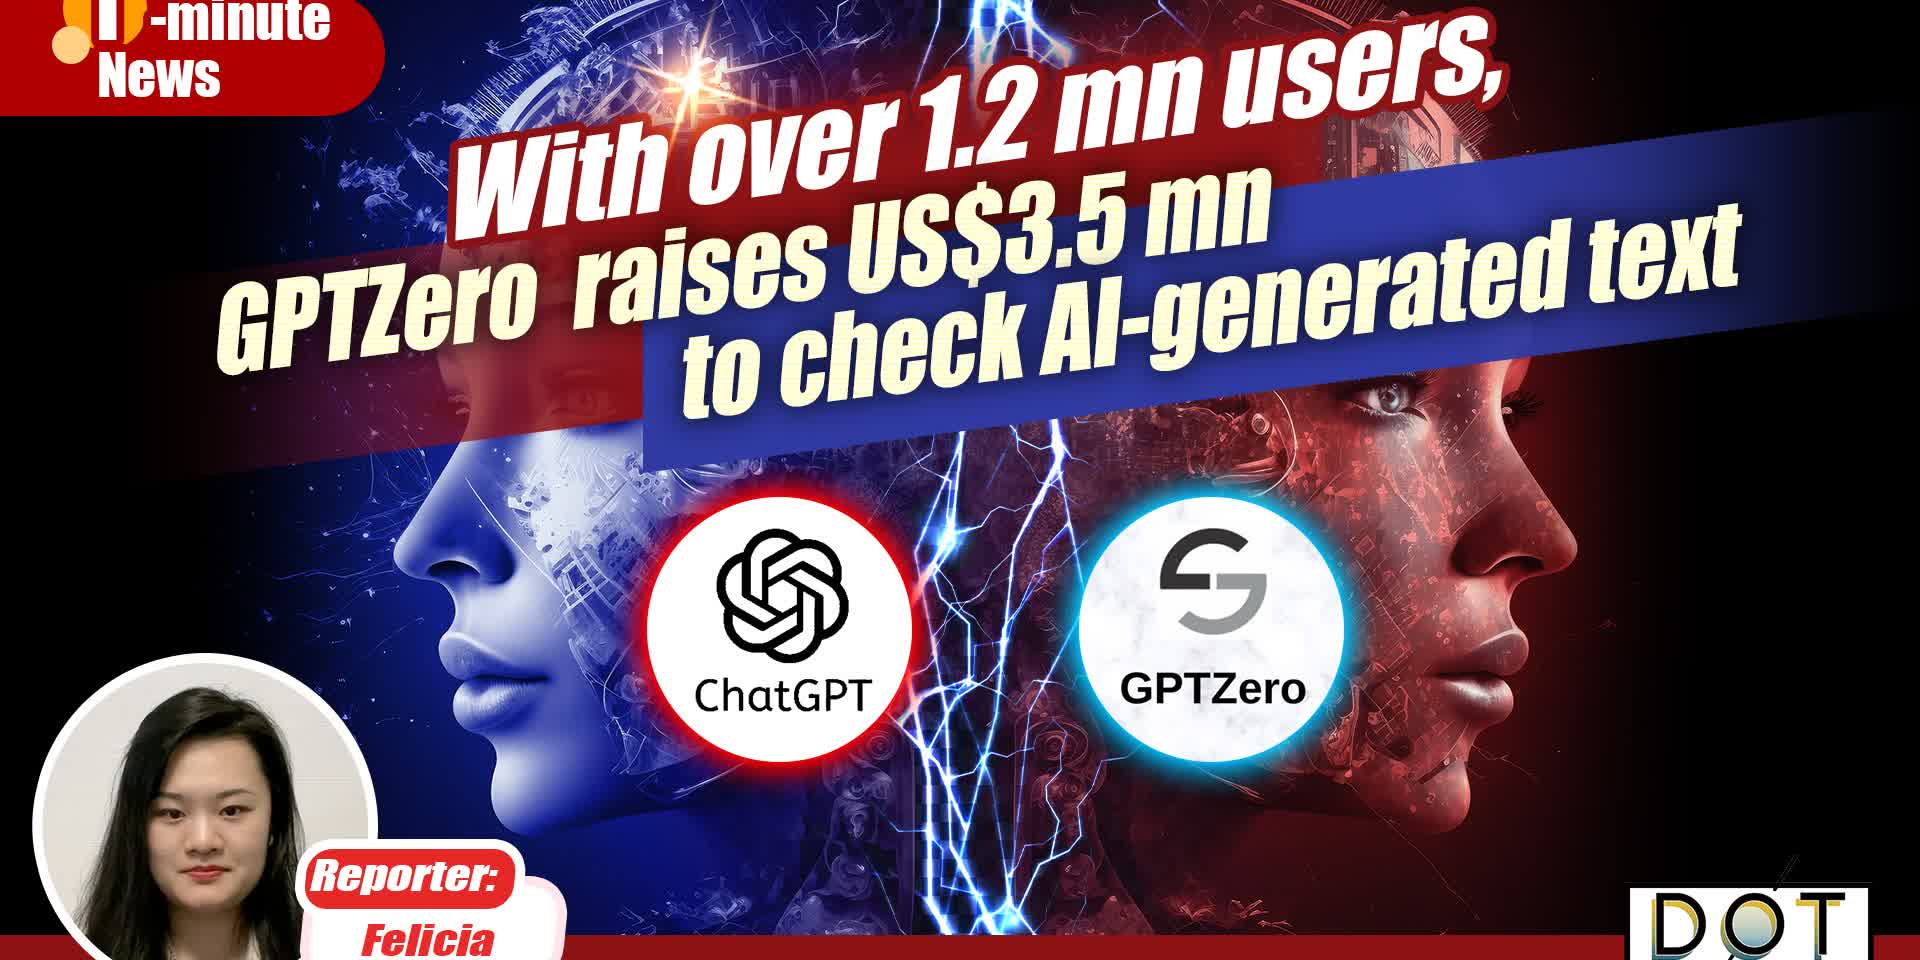 Watch This | With over 1.2 mn users, 'GPTZero' raises US$3.5 mn to check AI-generated text